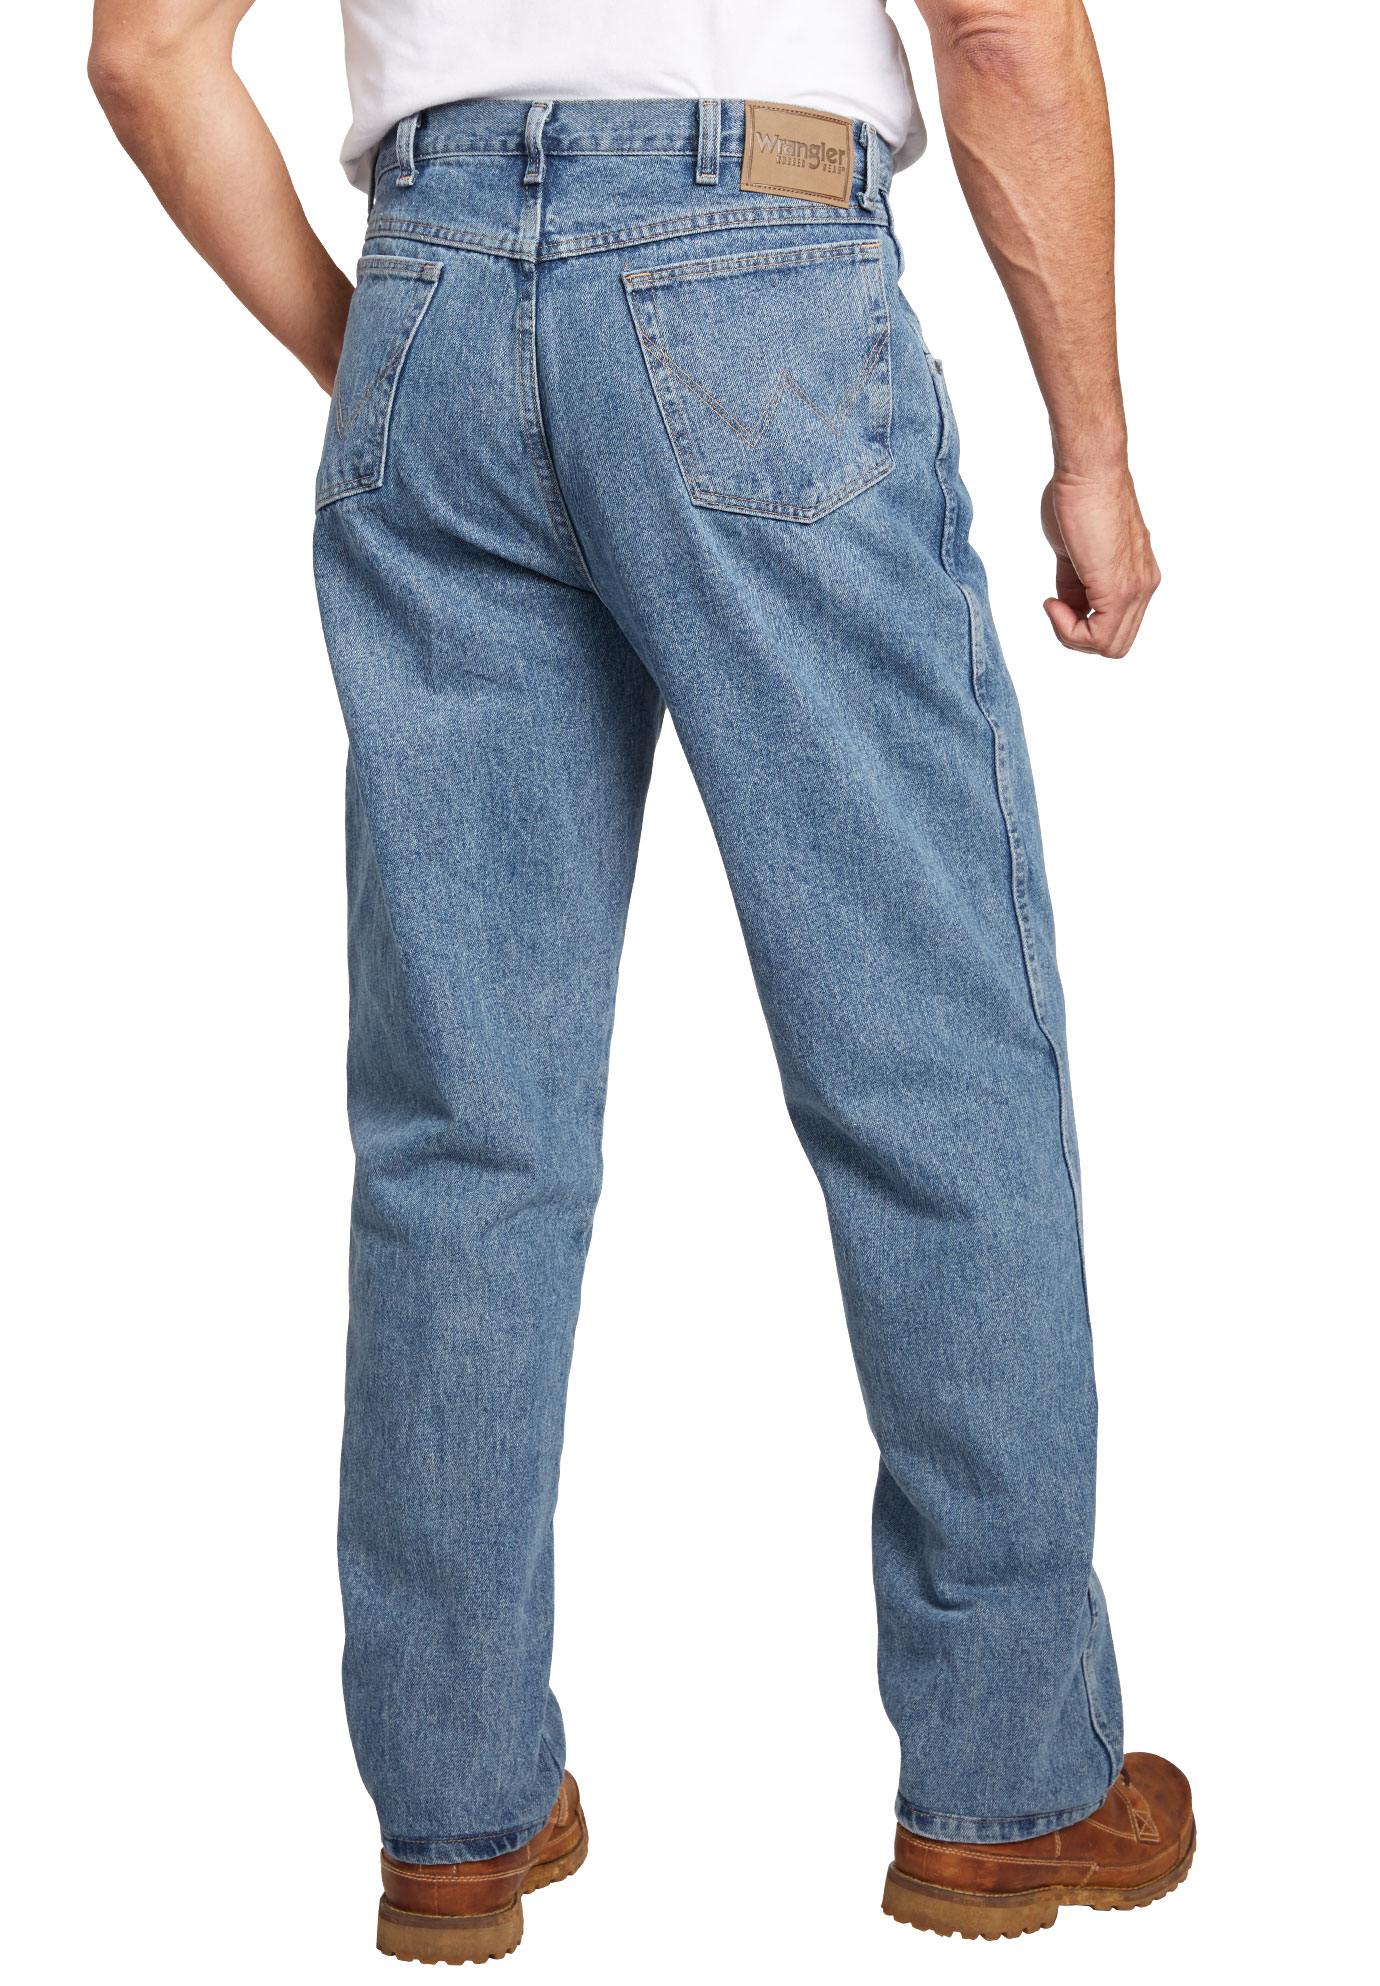 Wrangler Men's Big & Tall  Relaxed Fit Classic Jeans - image 3 of 6